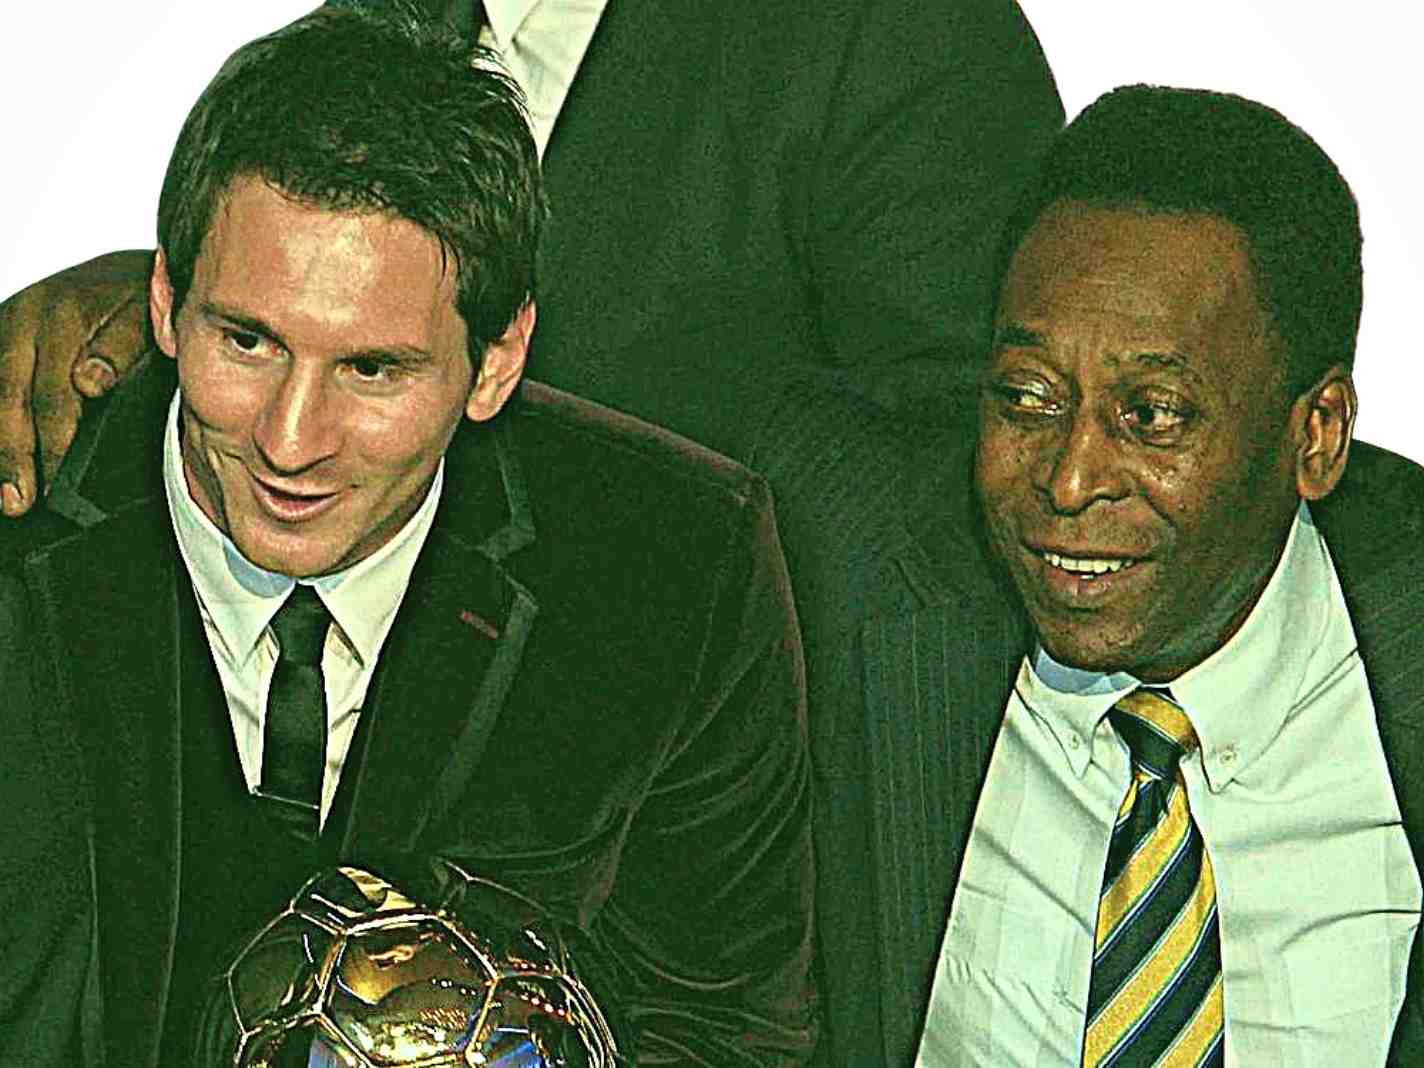 Pele was the ultimate Lionel Messi fanboy during his final days and it’s heartwarming AF